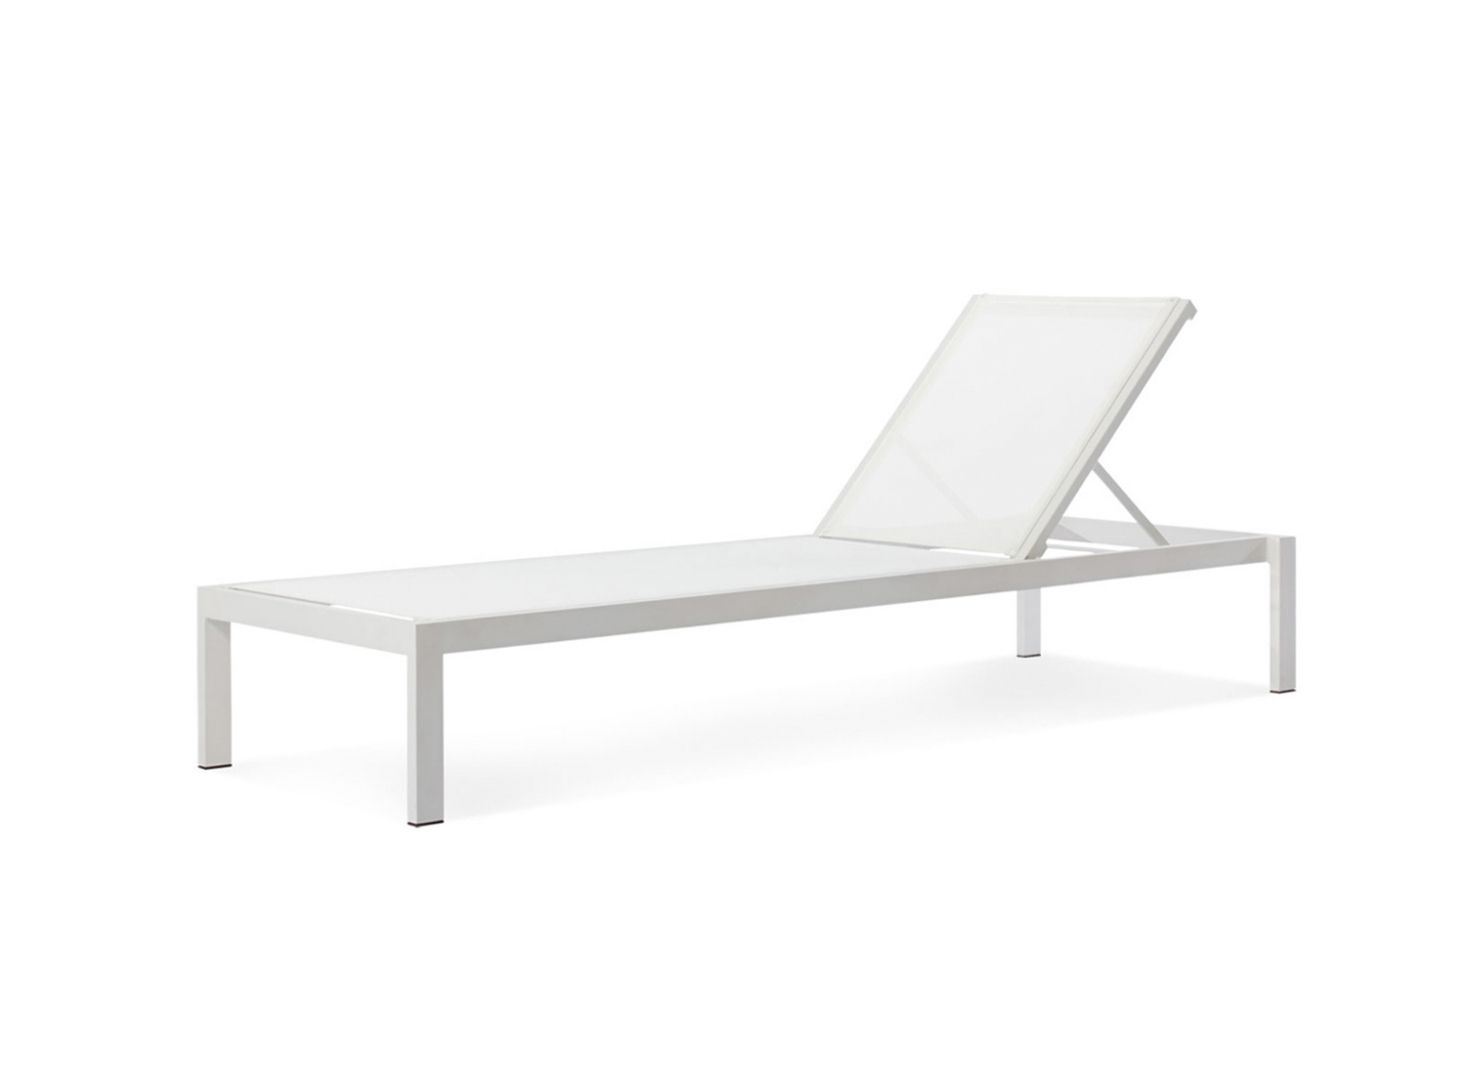 Outdoor Aluminum Adjustable Chaise Lounges In 2020 10 Easy Pieces: Modern White Outdoor Chaise Lounges – Gardenista (View 19 of 25)